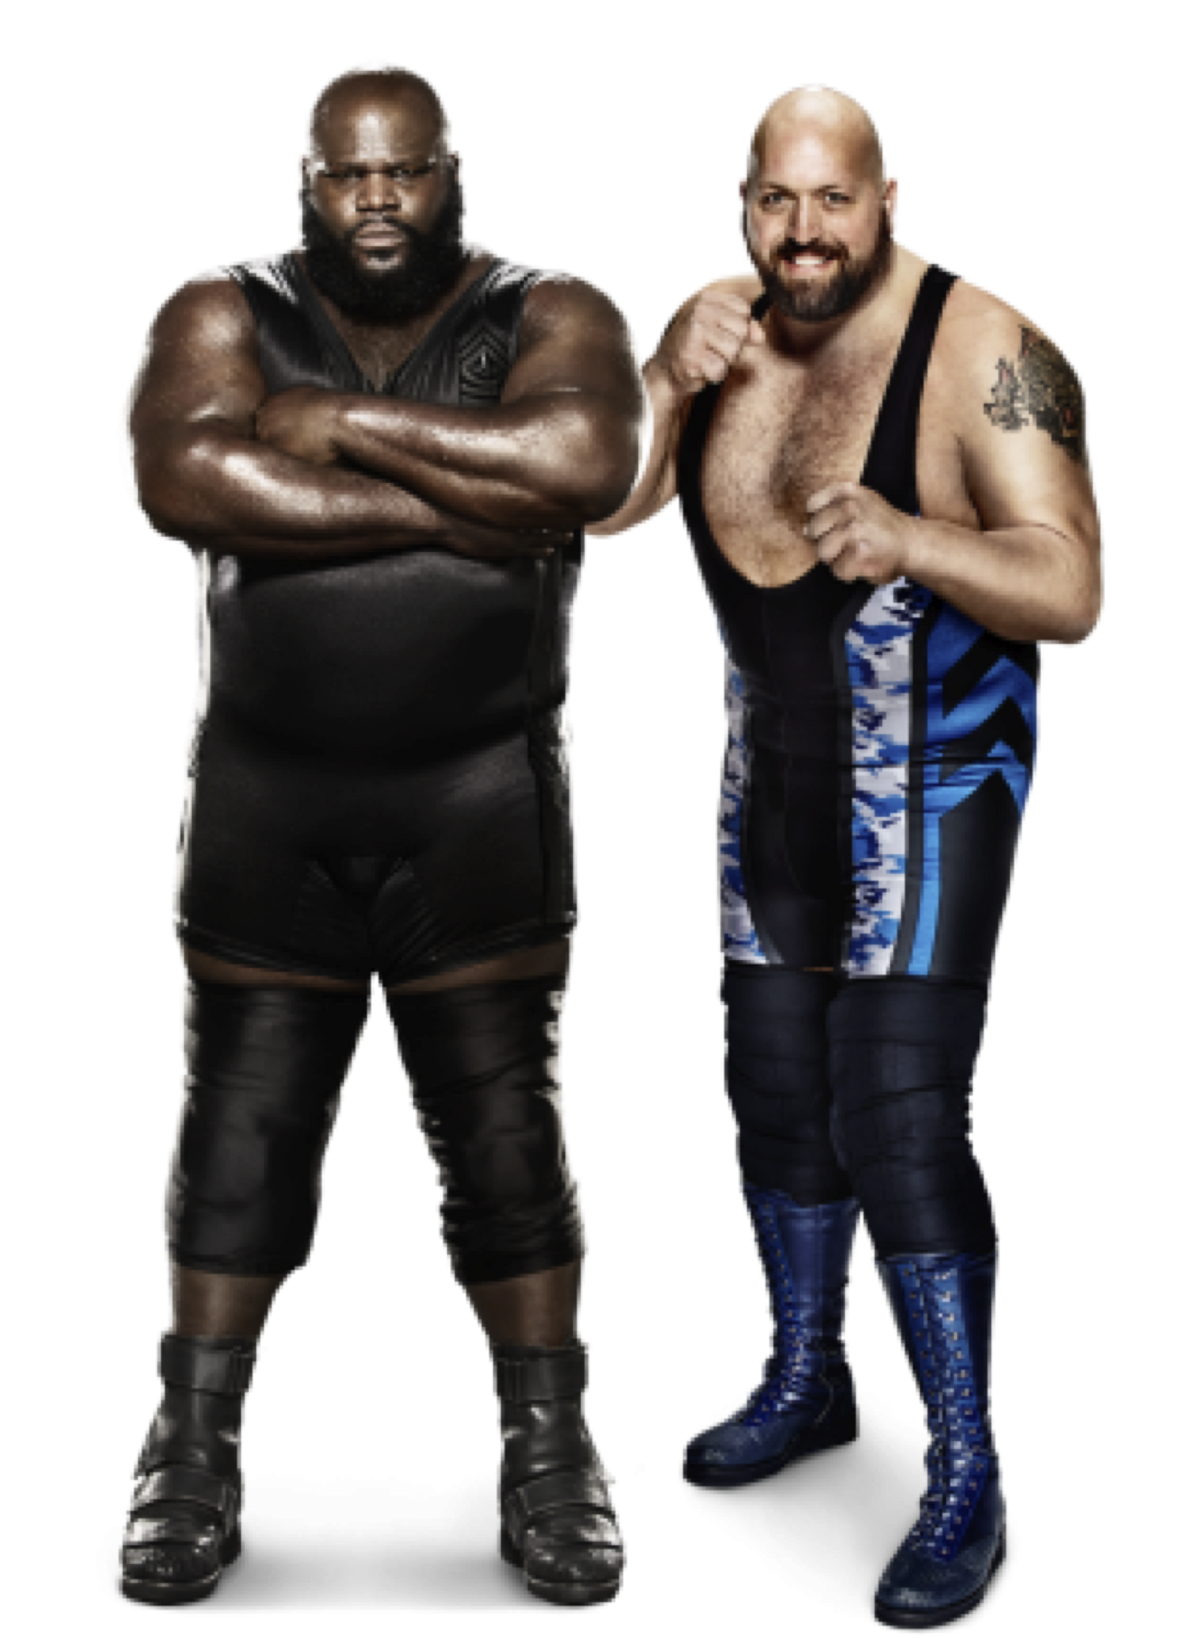 https://static.wikia.nocookie.net/prowrestling/images/3/3b/Mark-Henry-Big-Show.png/revision/latest/scale-to-width-down/1200?cb=20140819174722